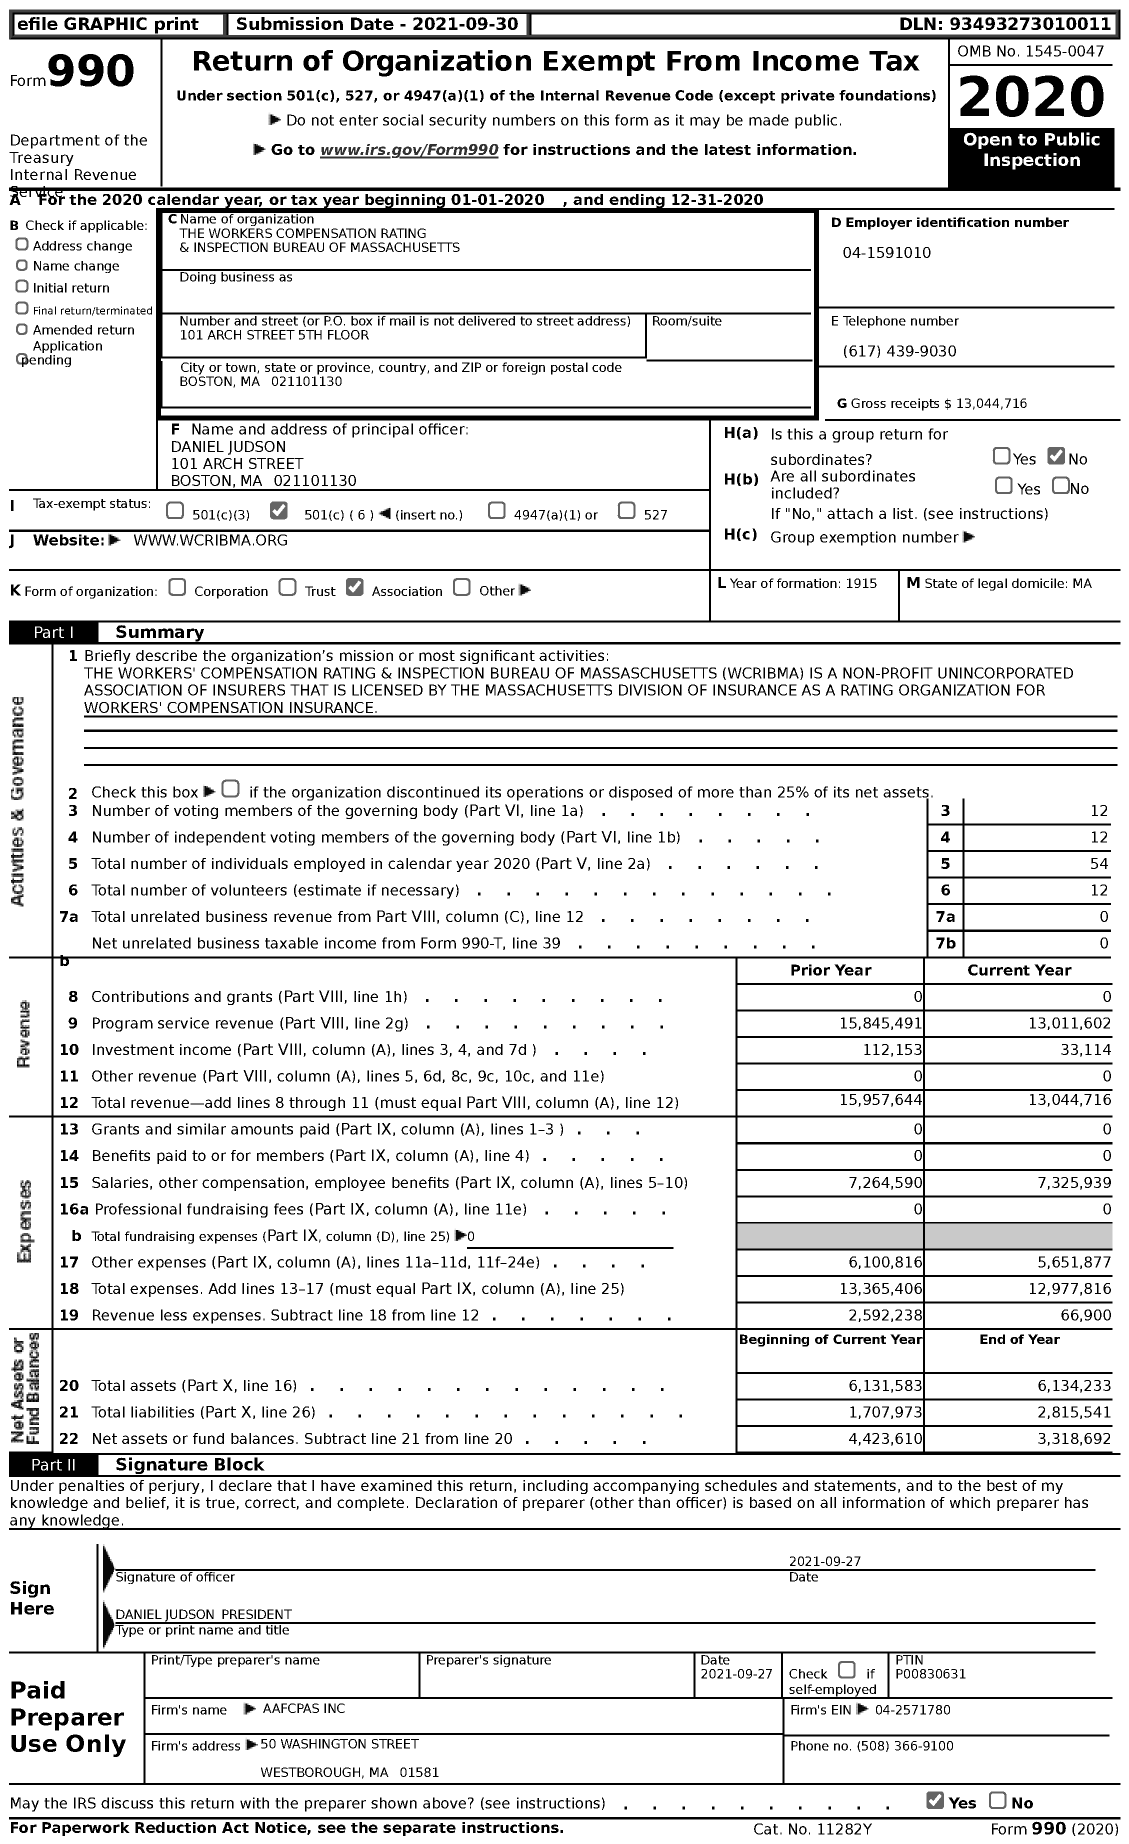 Image of first page of 2020 Form 990 for The Workers Compensation Rating and Inspection Bureau of Massachusetts